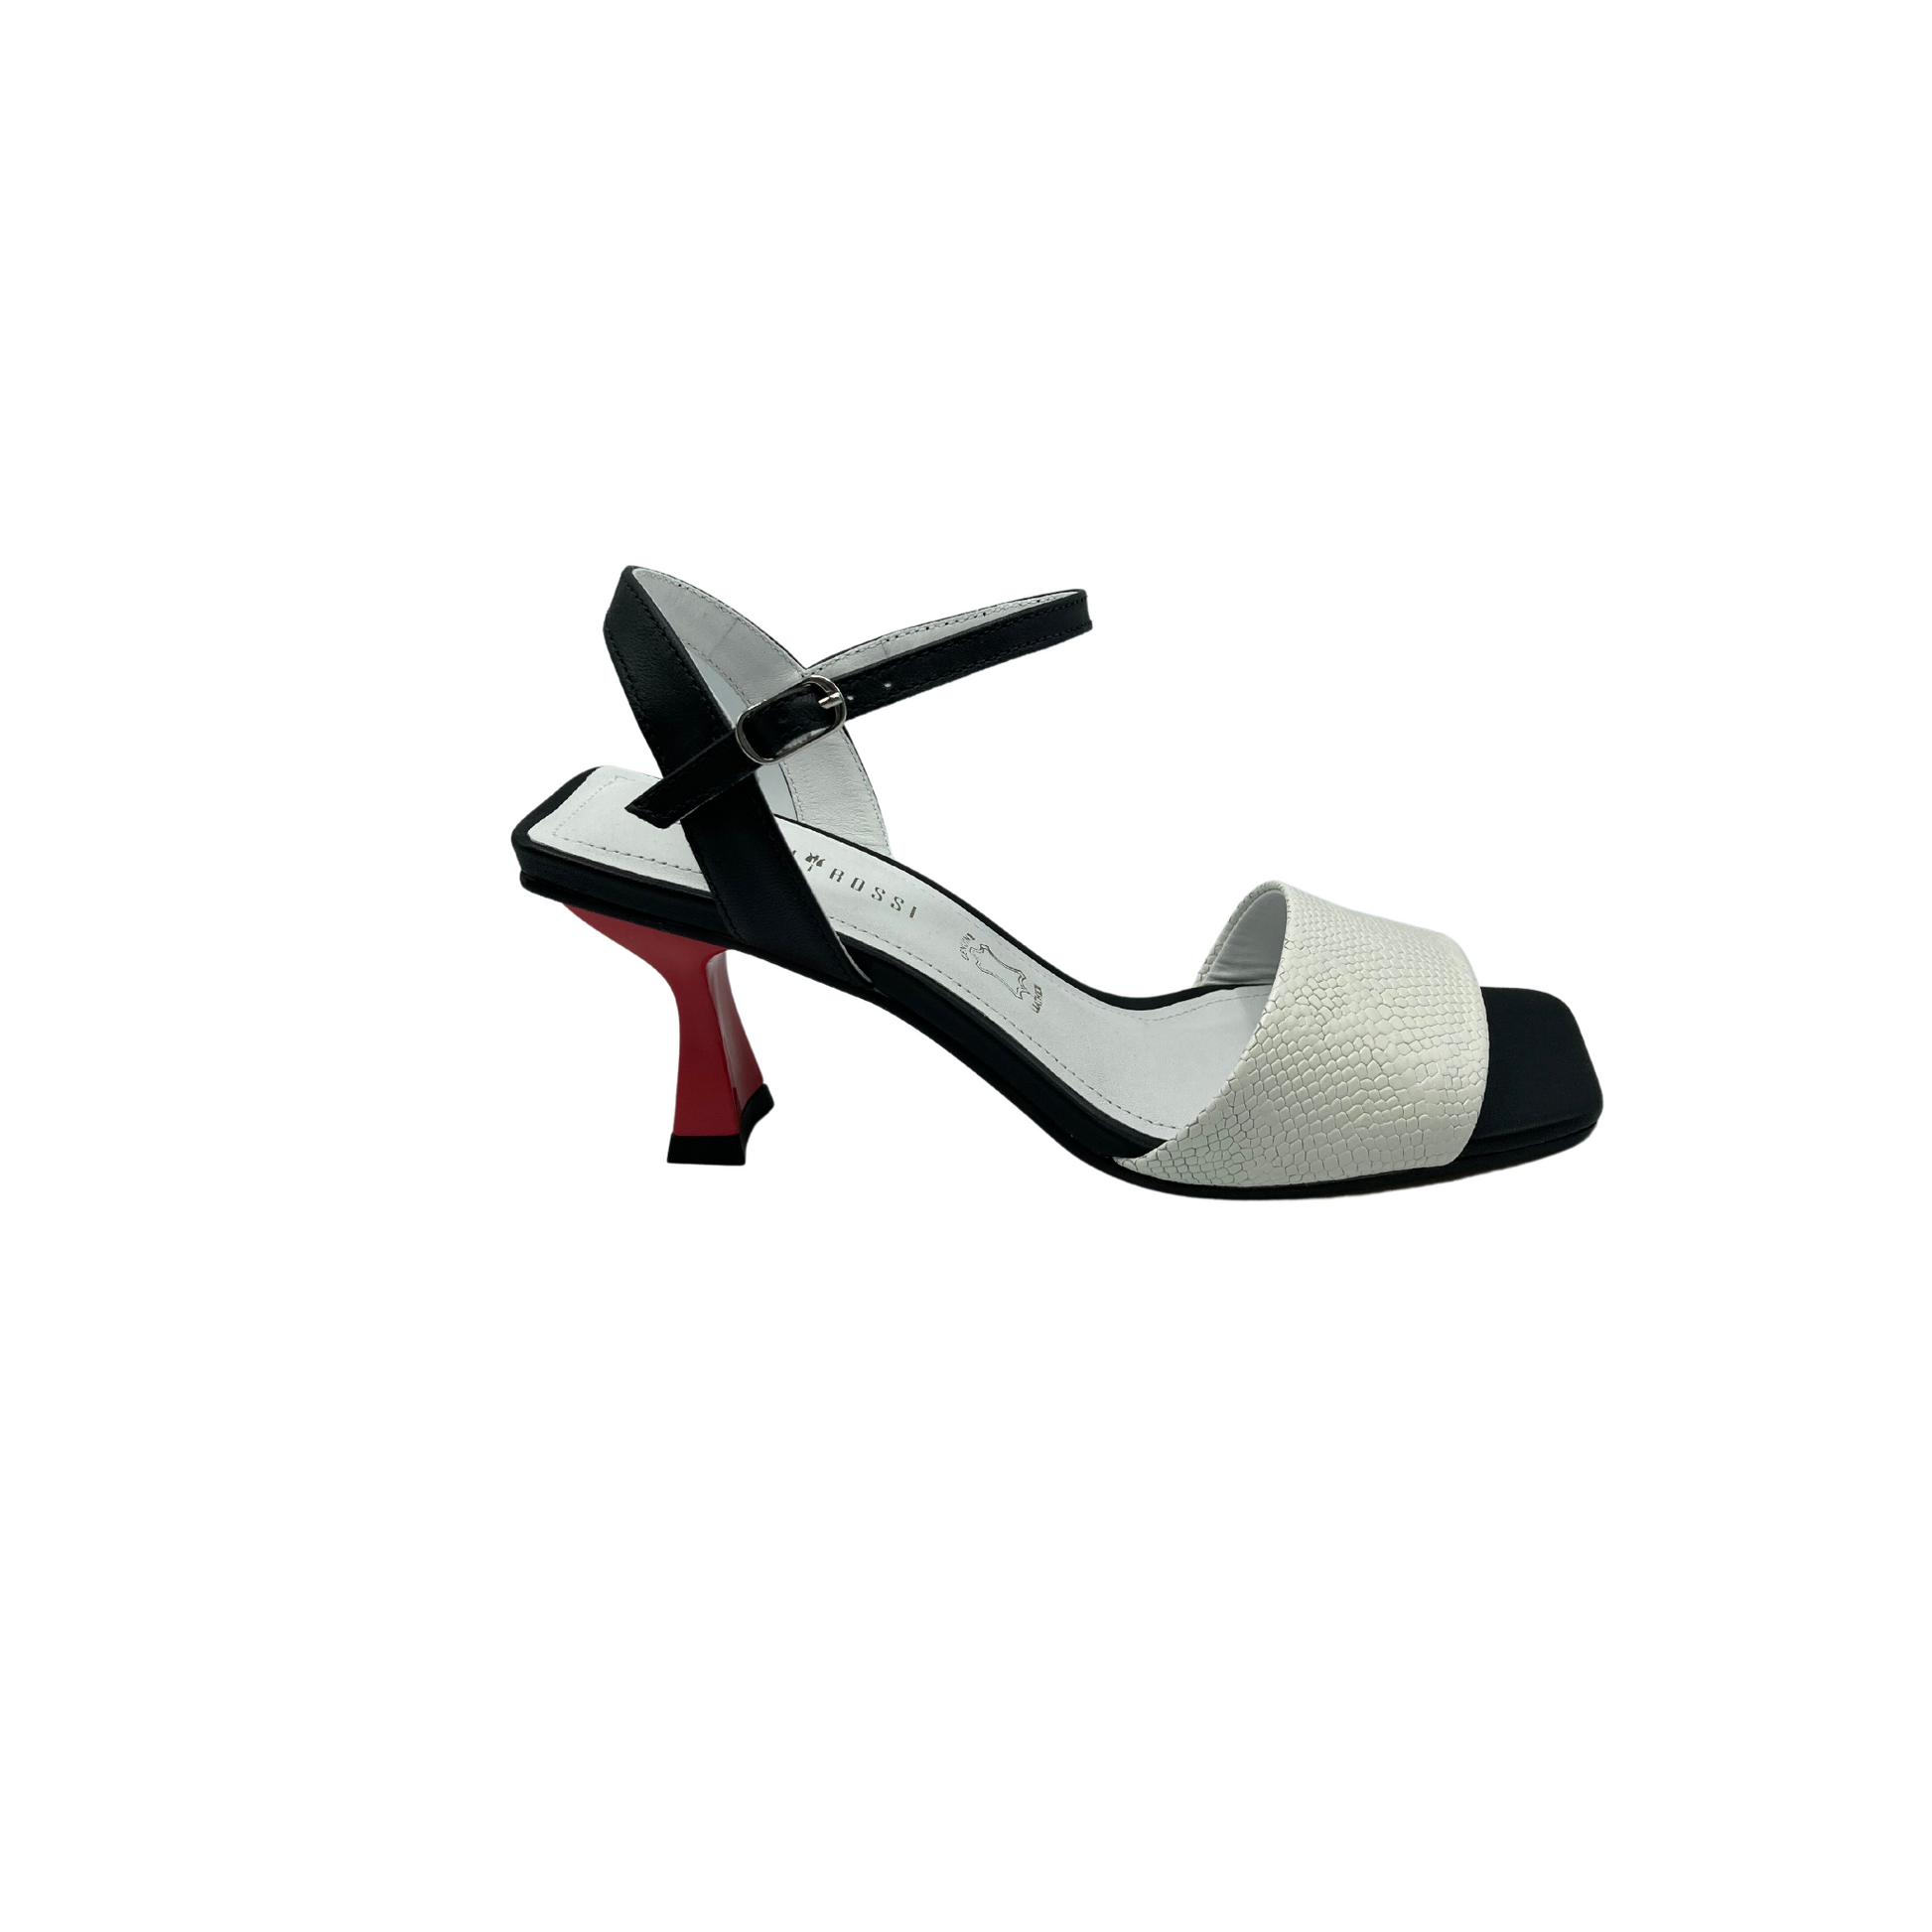 Outside view of classic sandal in black/white/red.